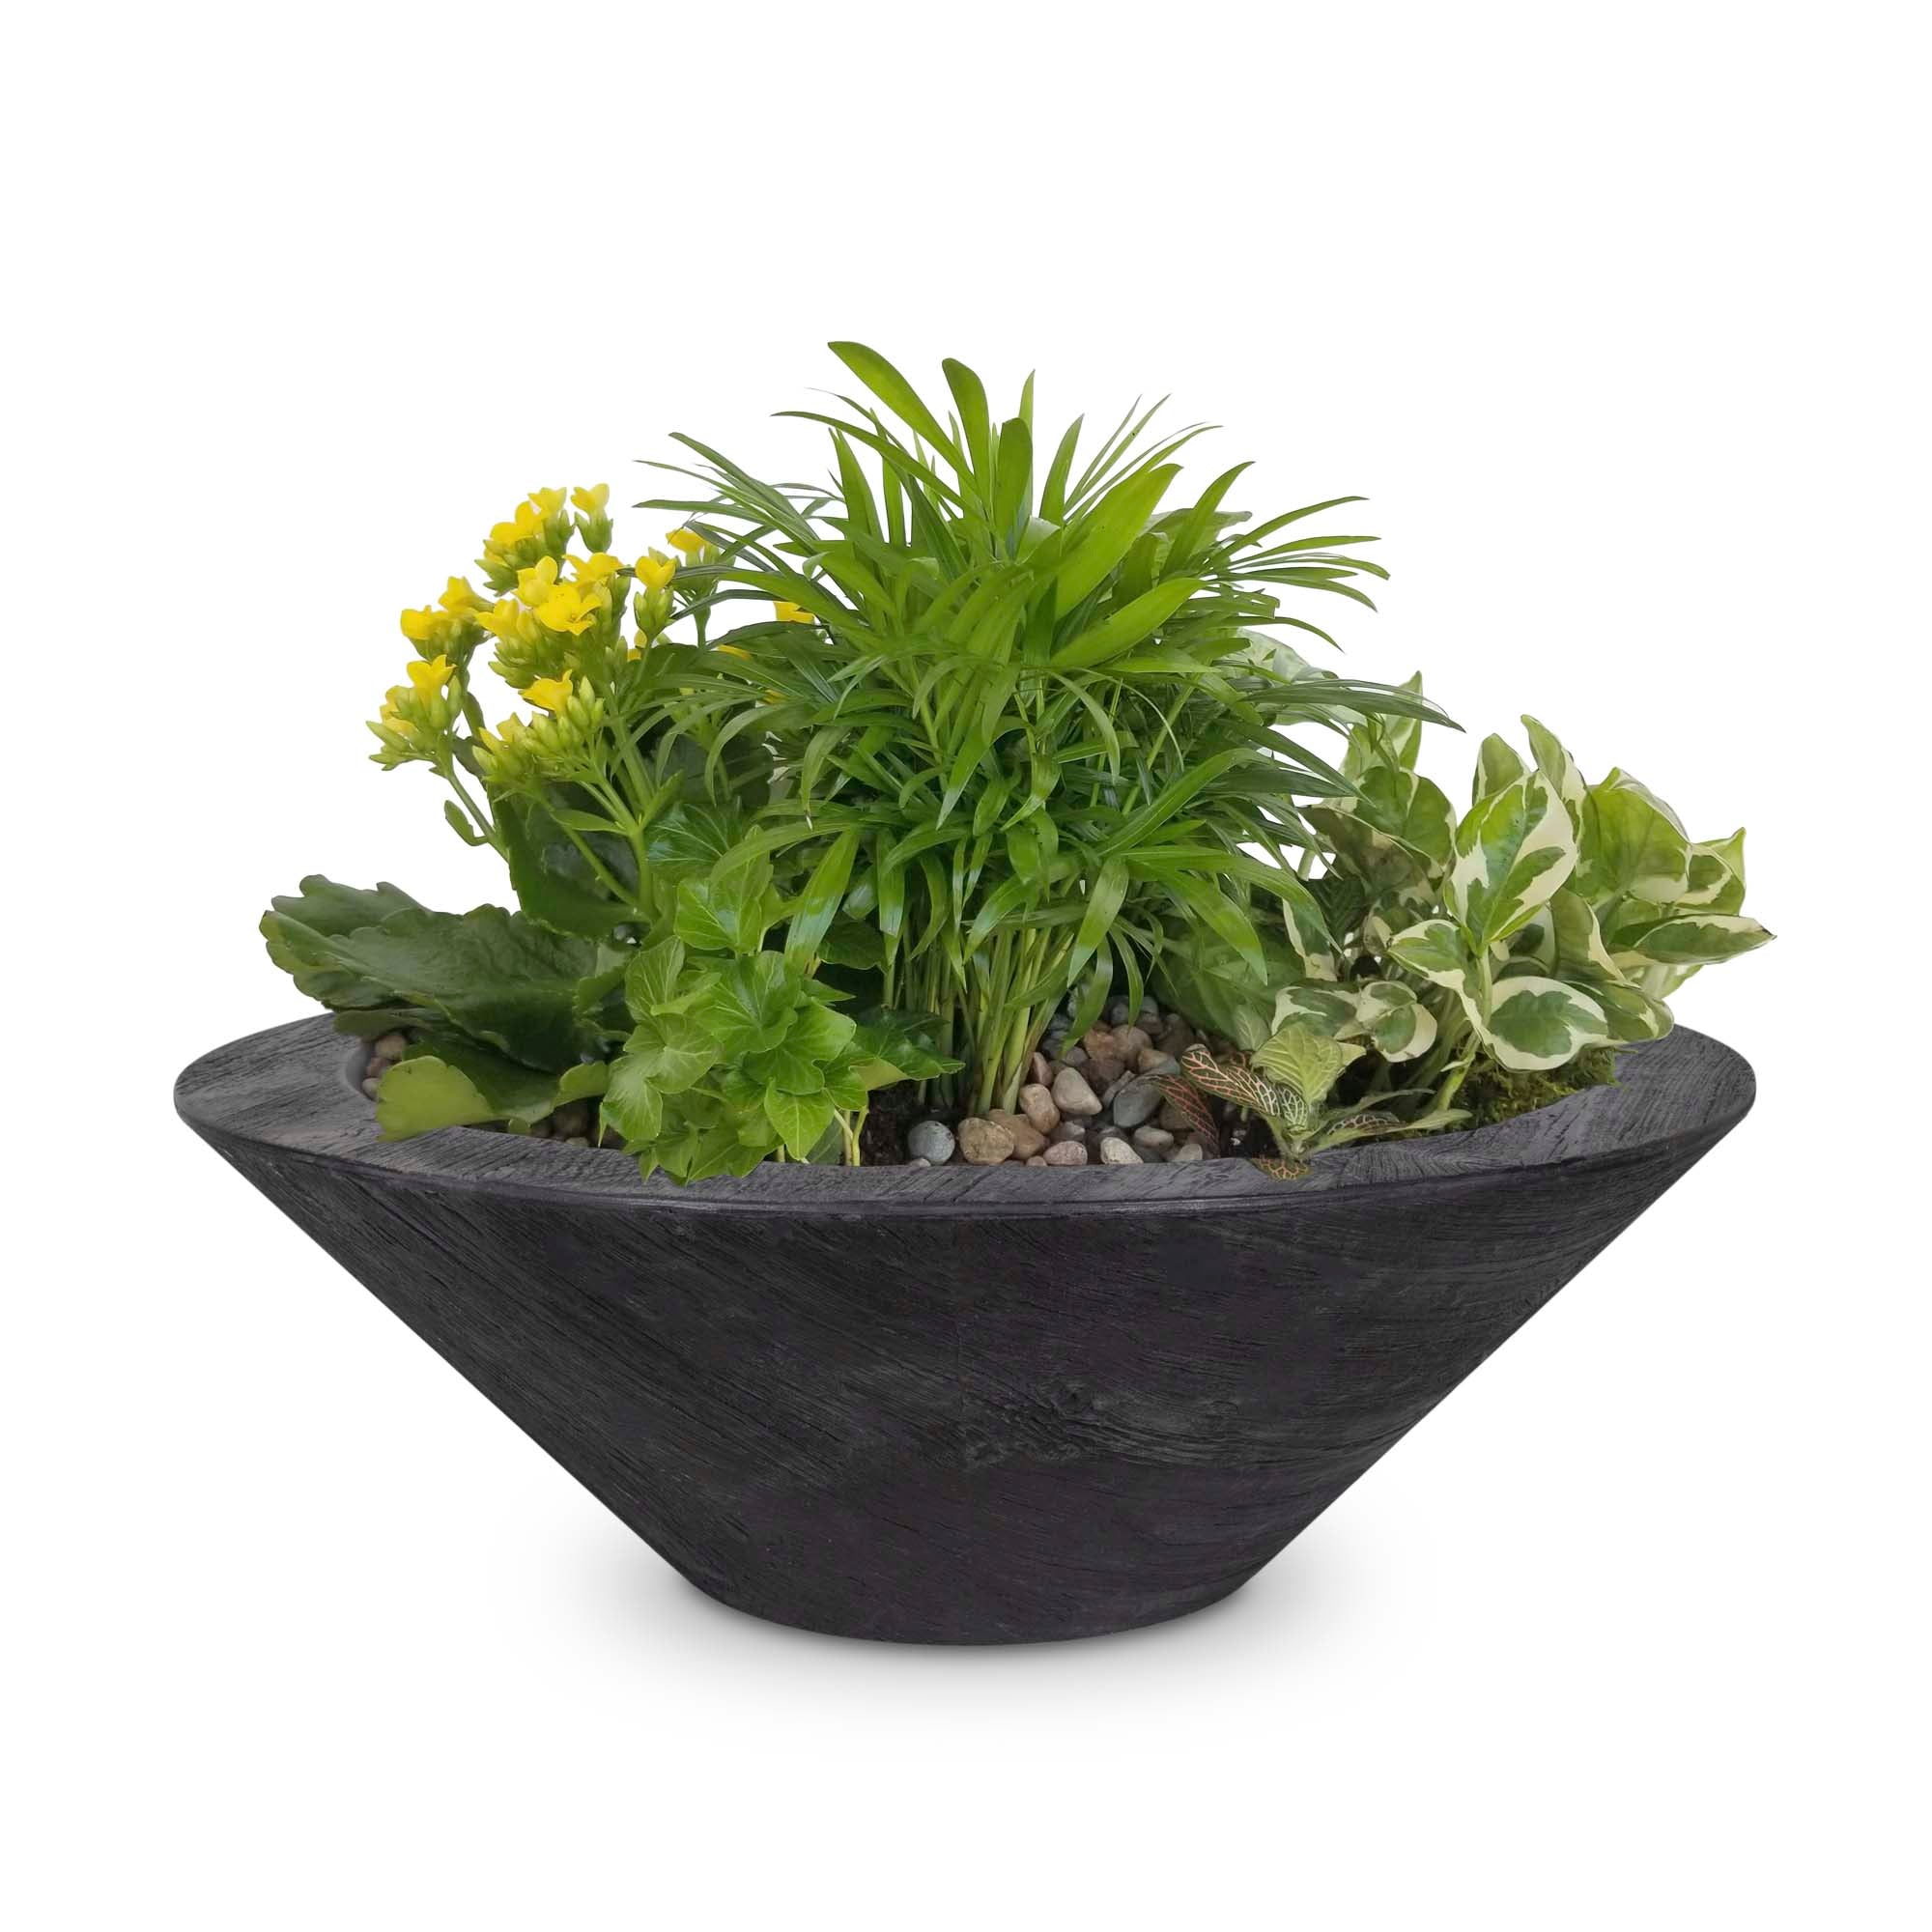 The Outdoor Plus Planter Collection